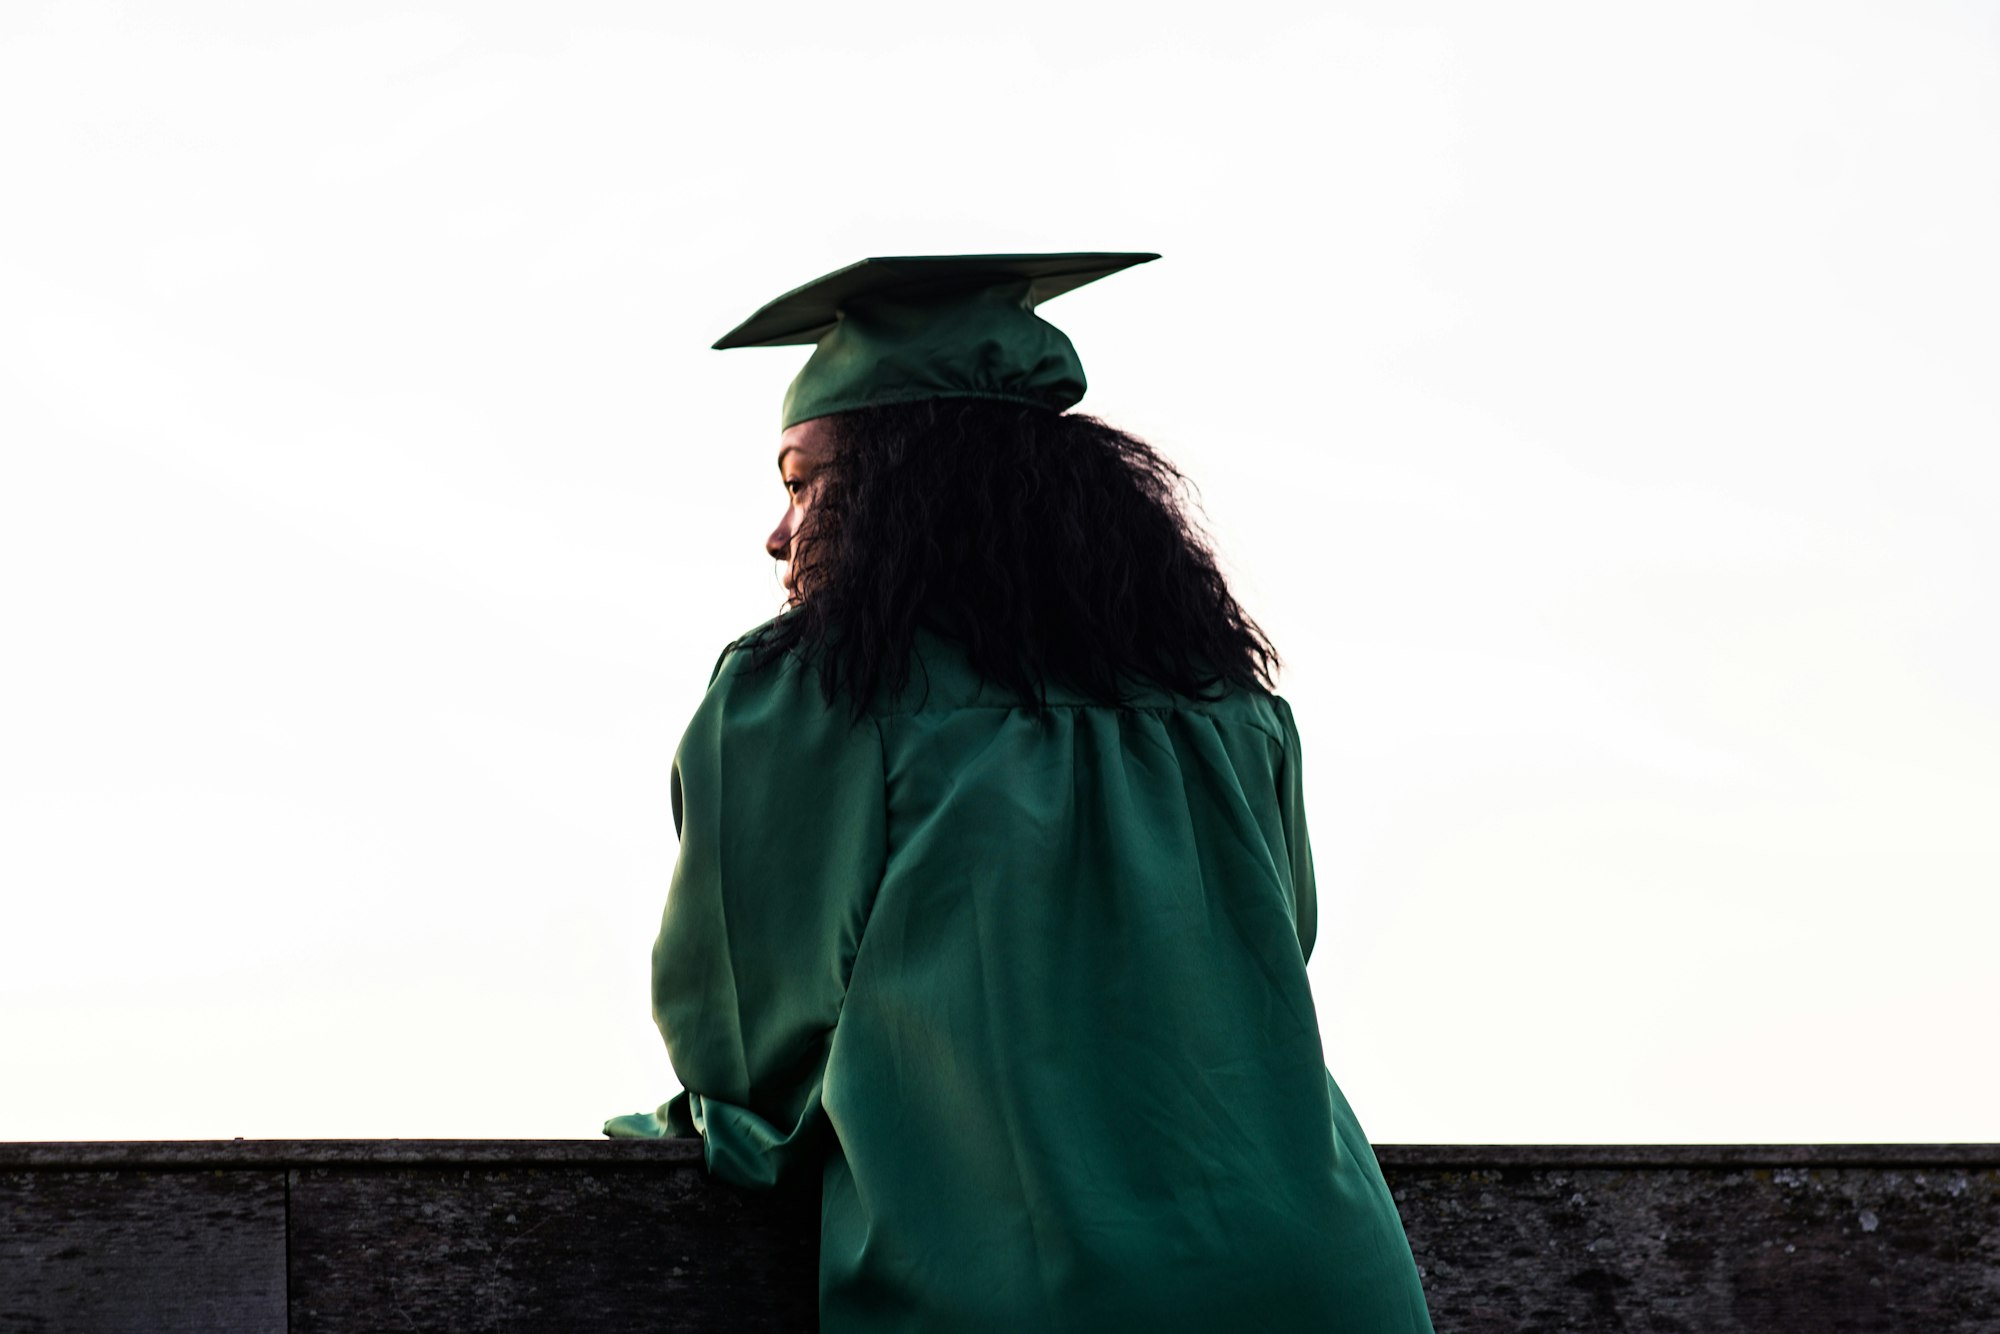 A student in her graduation gown looks out over a wall.